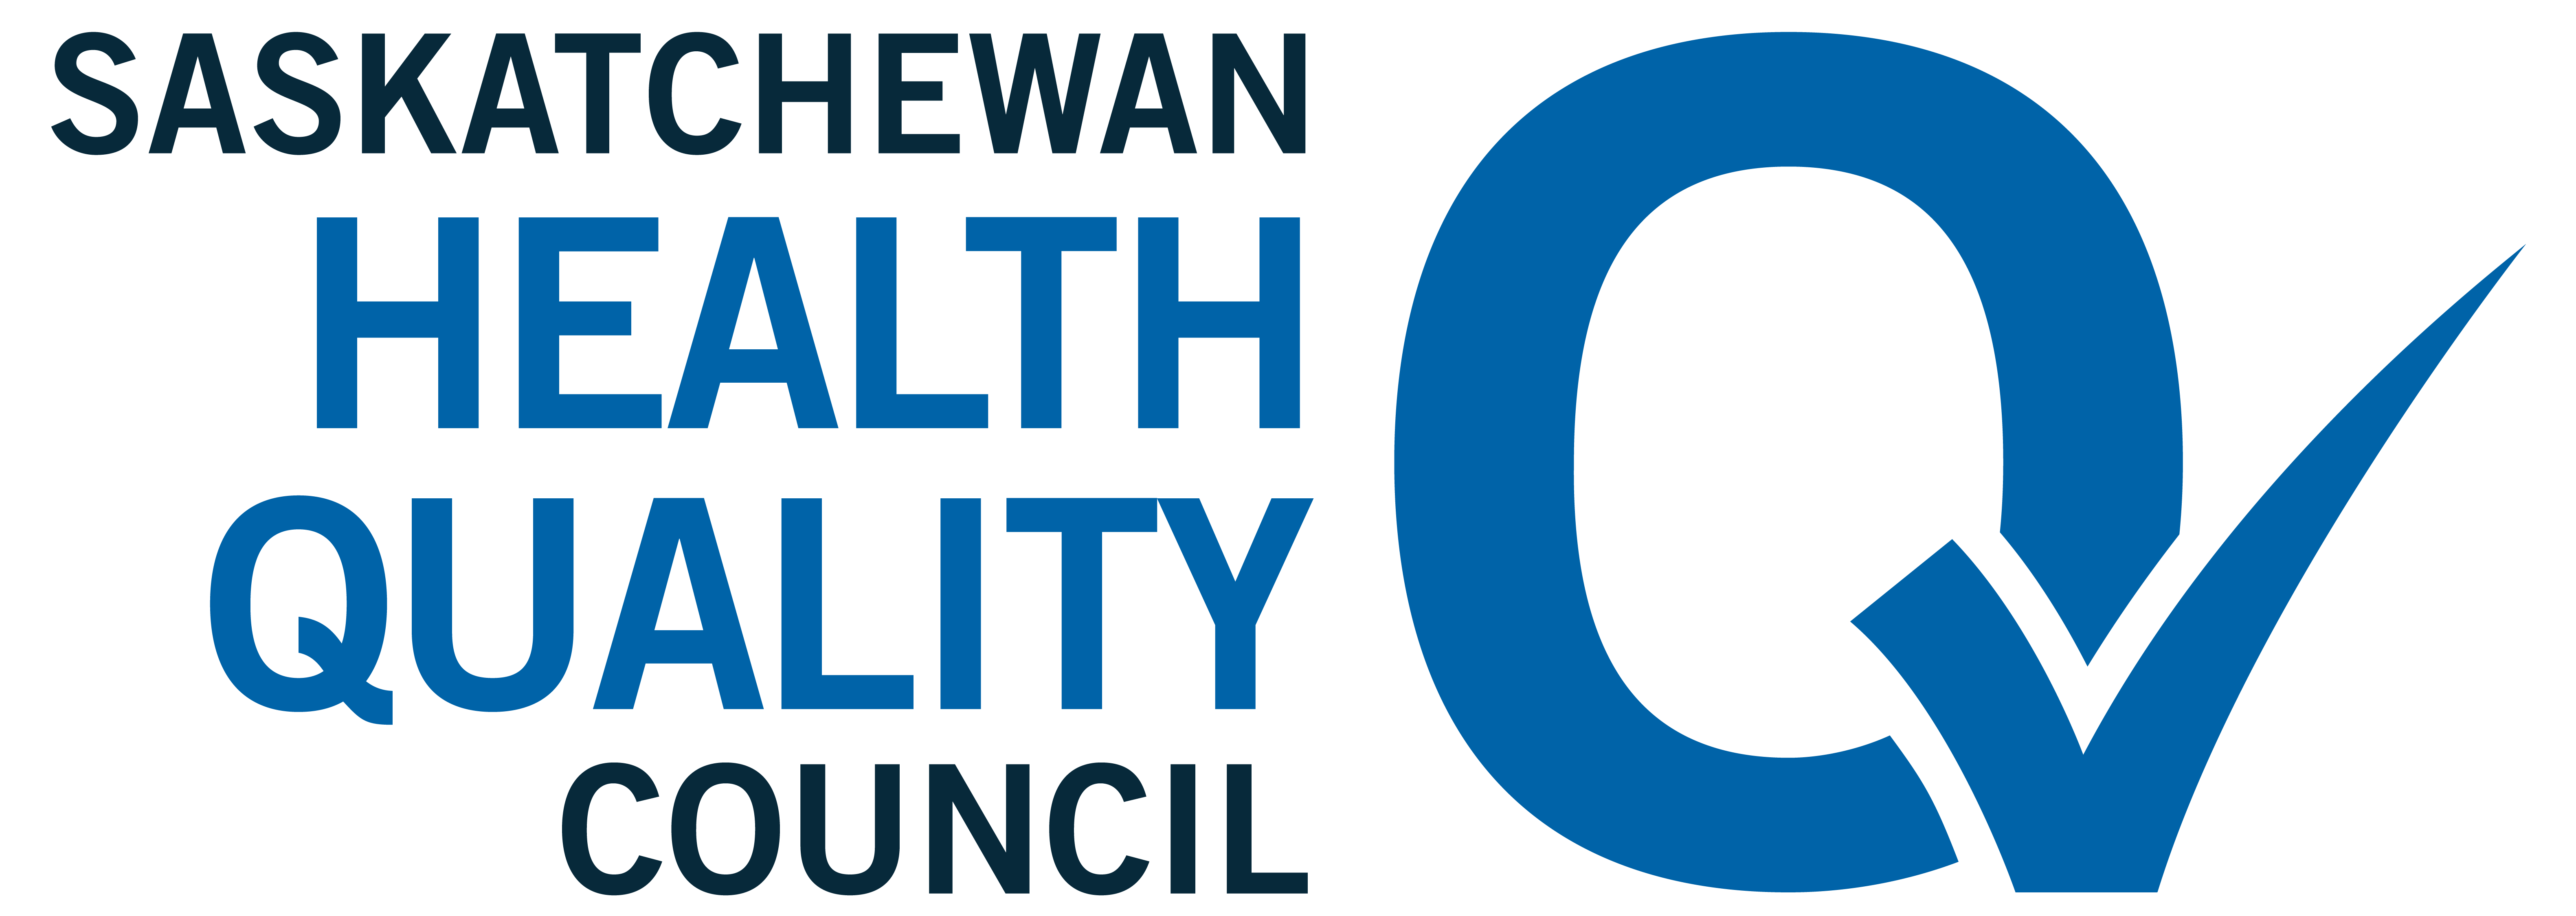 Saskatchewan Health Quality Council Logo. Saskatchewan Health Quality Council in blue to the left of a blue Q with a checkmark for the tail.